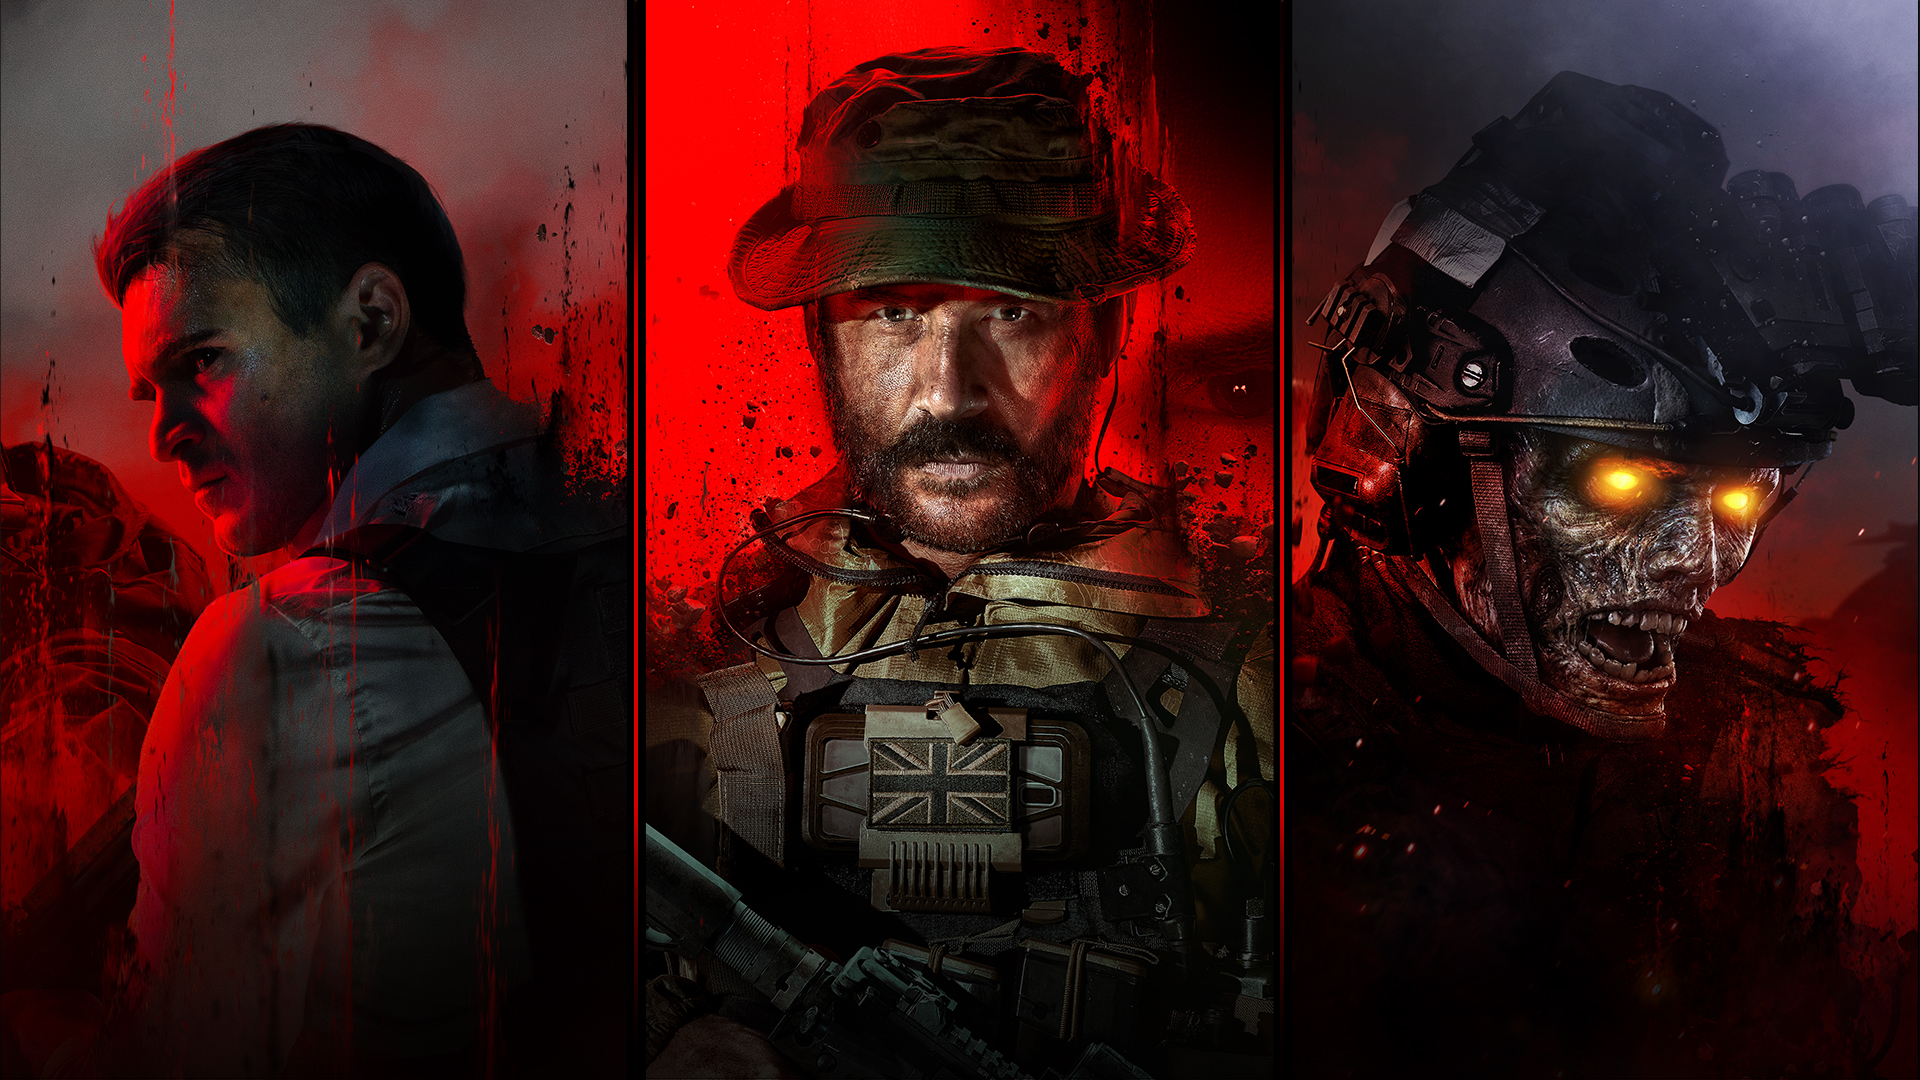 Exciting Update Alert: Call of Duty Modern Warfare 3 and Warzone Gear Up for Season 1 Reloaded - What's New?